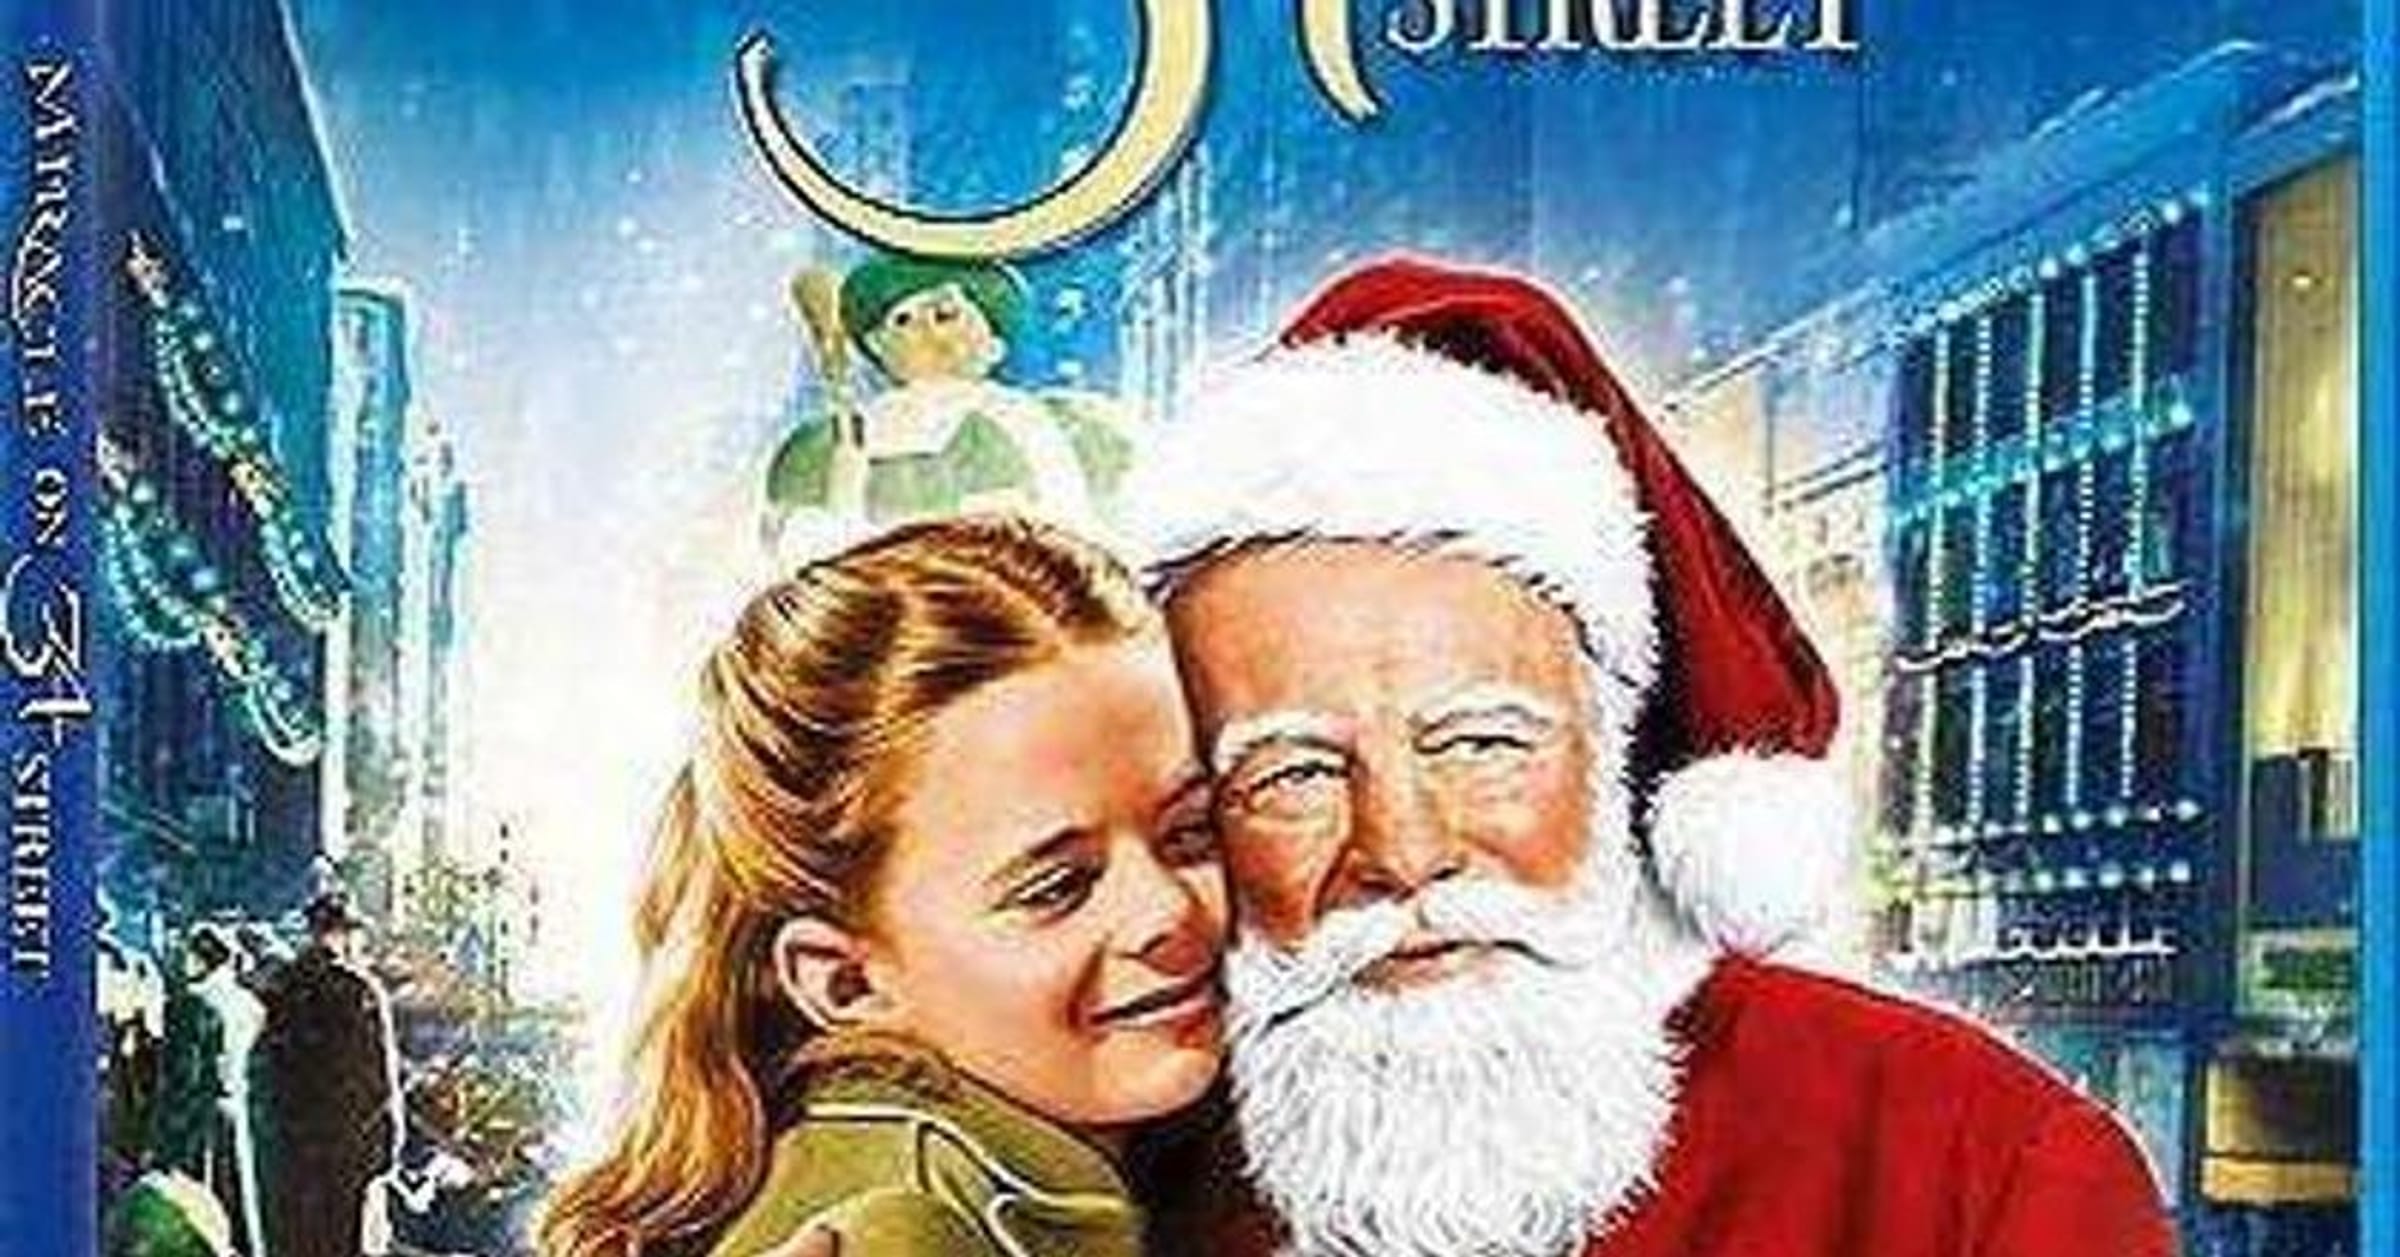 miracle on 34th street cast